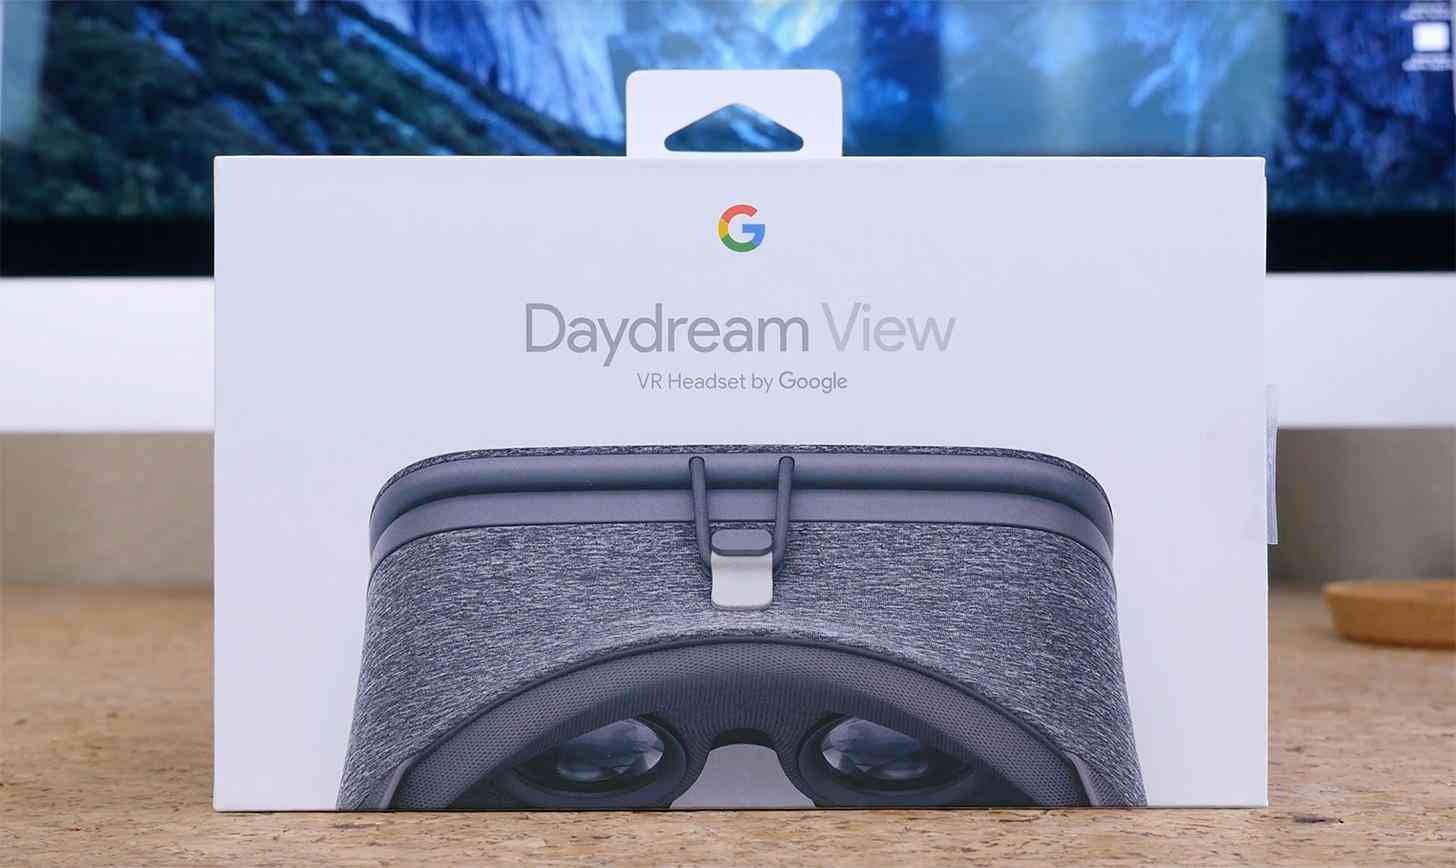 Google Daydream View VR headset hands-on